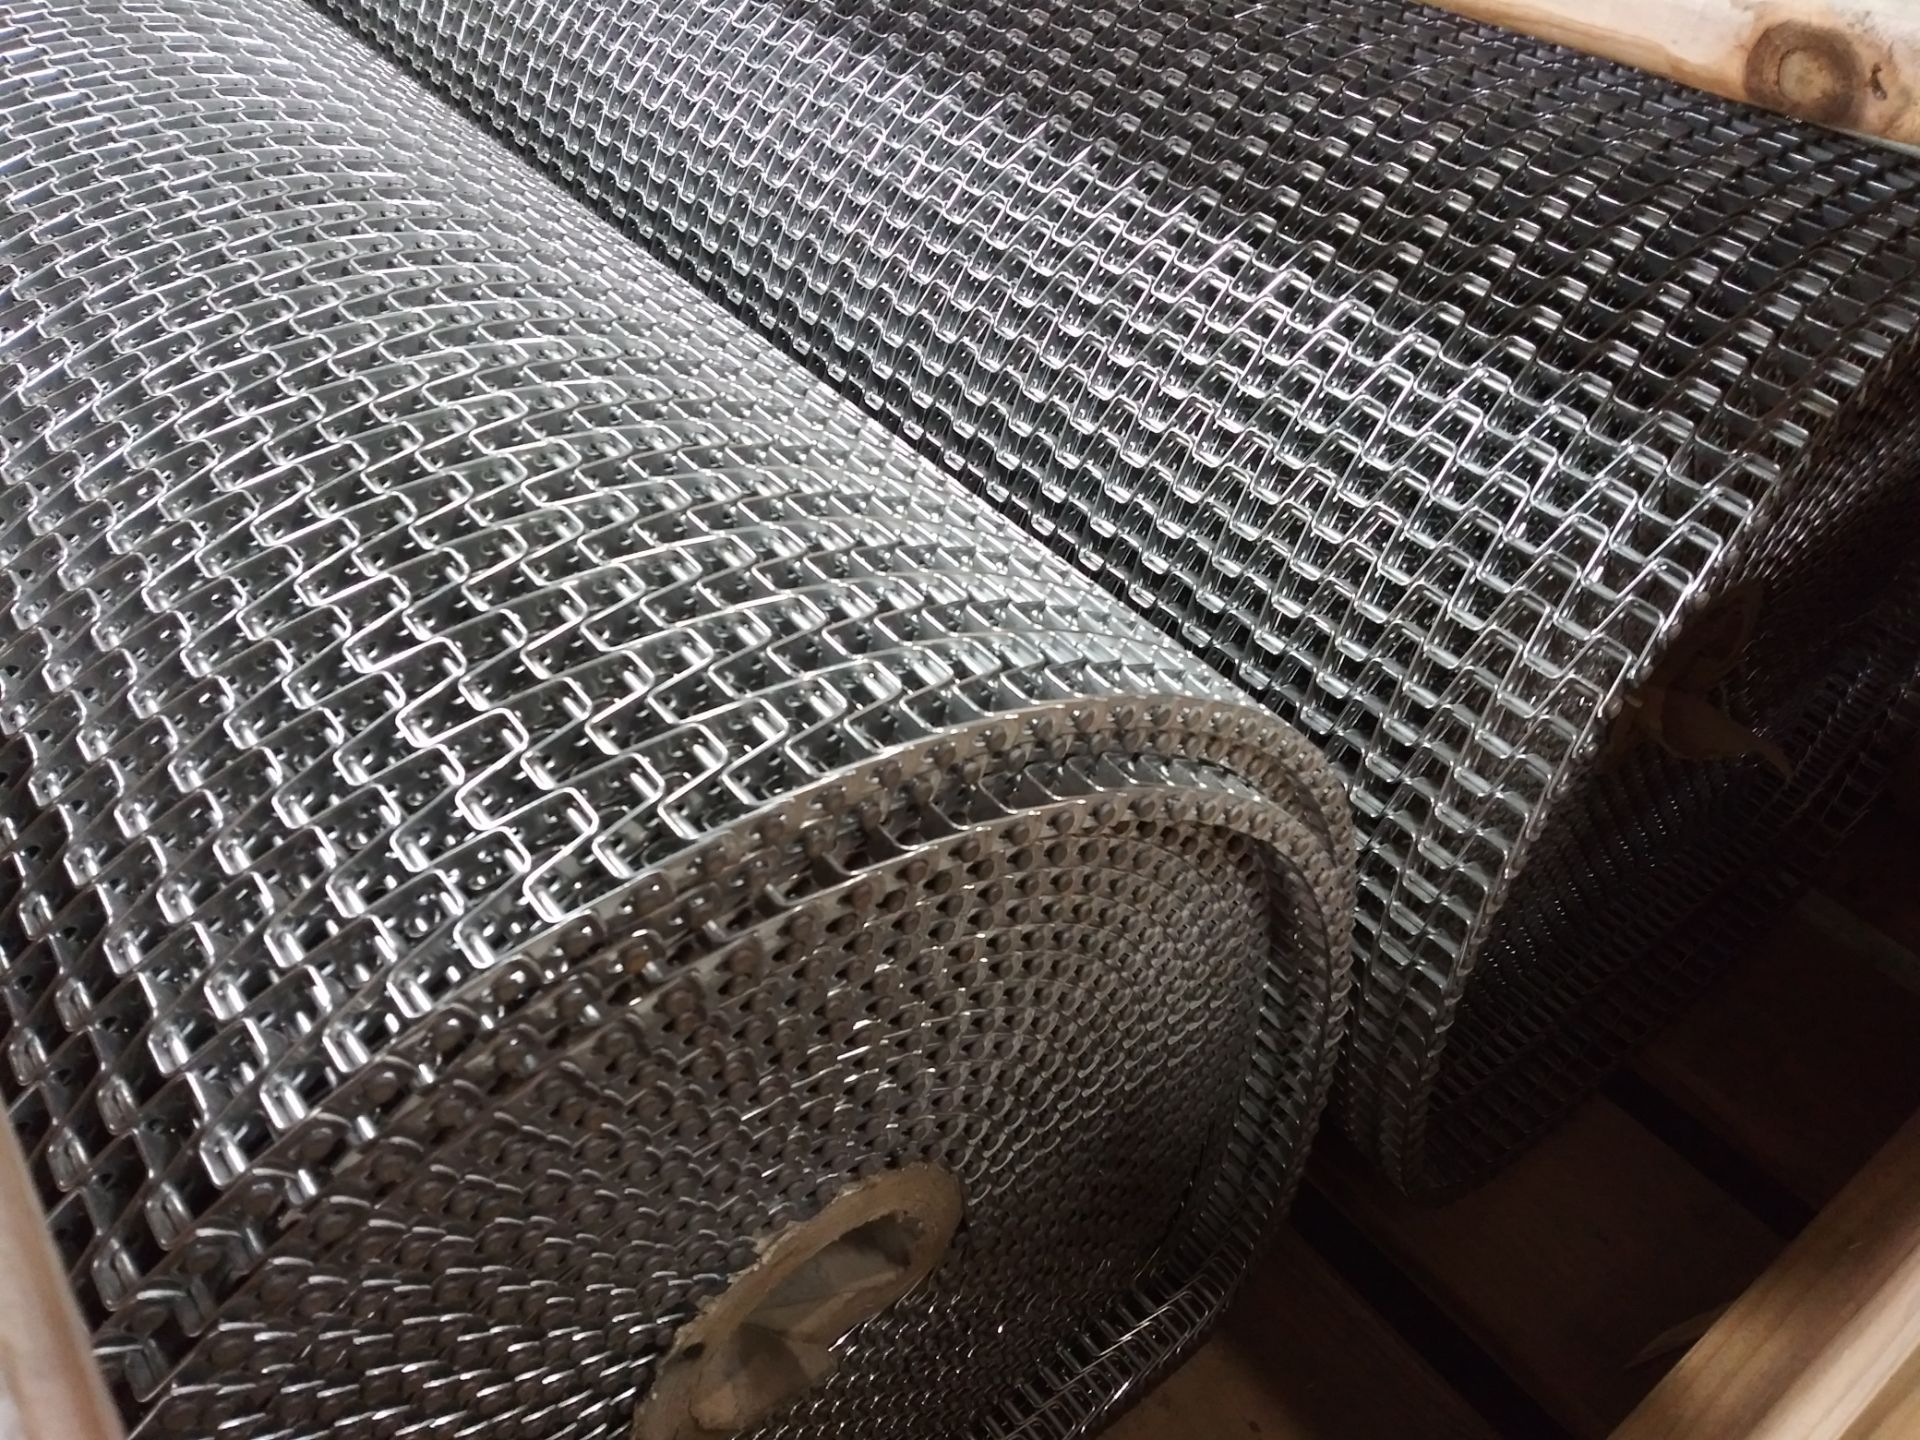 Pair of New Cambridge 50' X 40" Wide Stainless Steel Mesh Conveyor Chain - Image 2 of 2